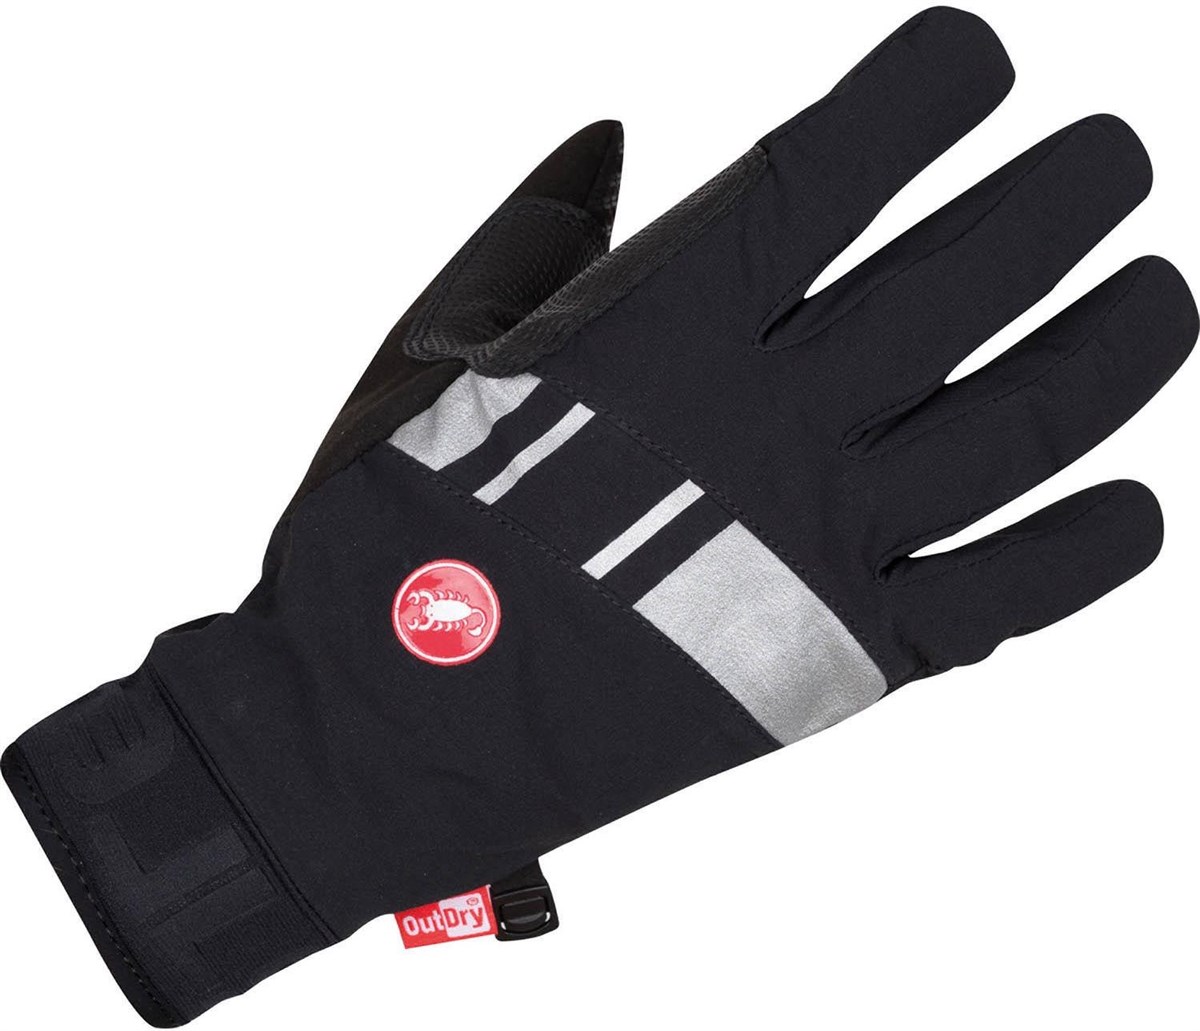 Castelli Tempesta Long Finger Cycling Gloves SS17 product image